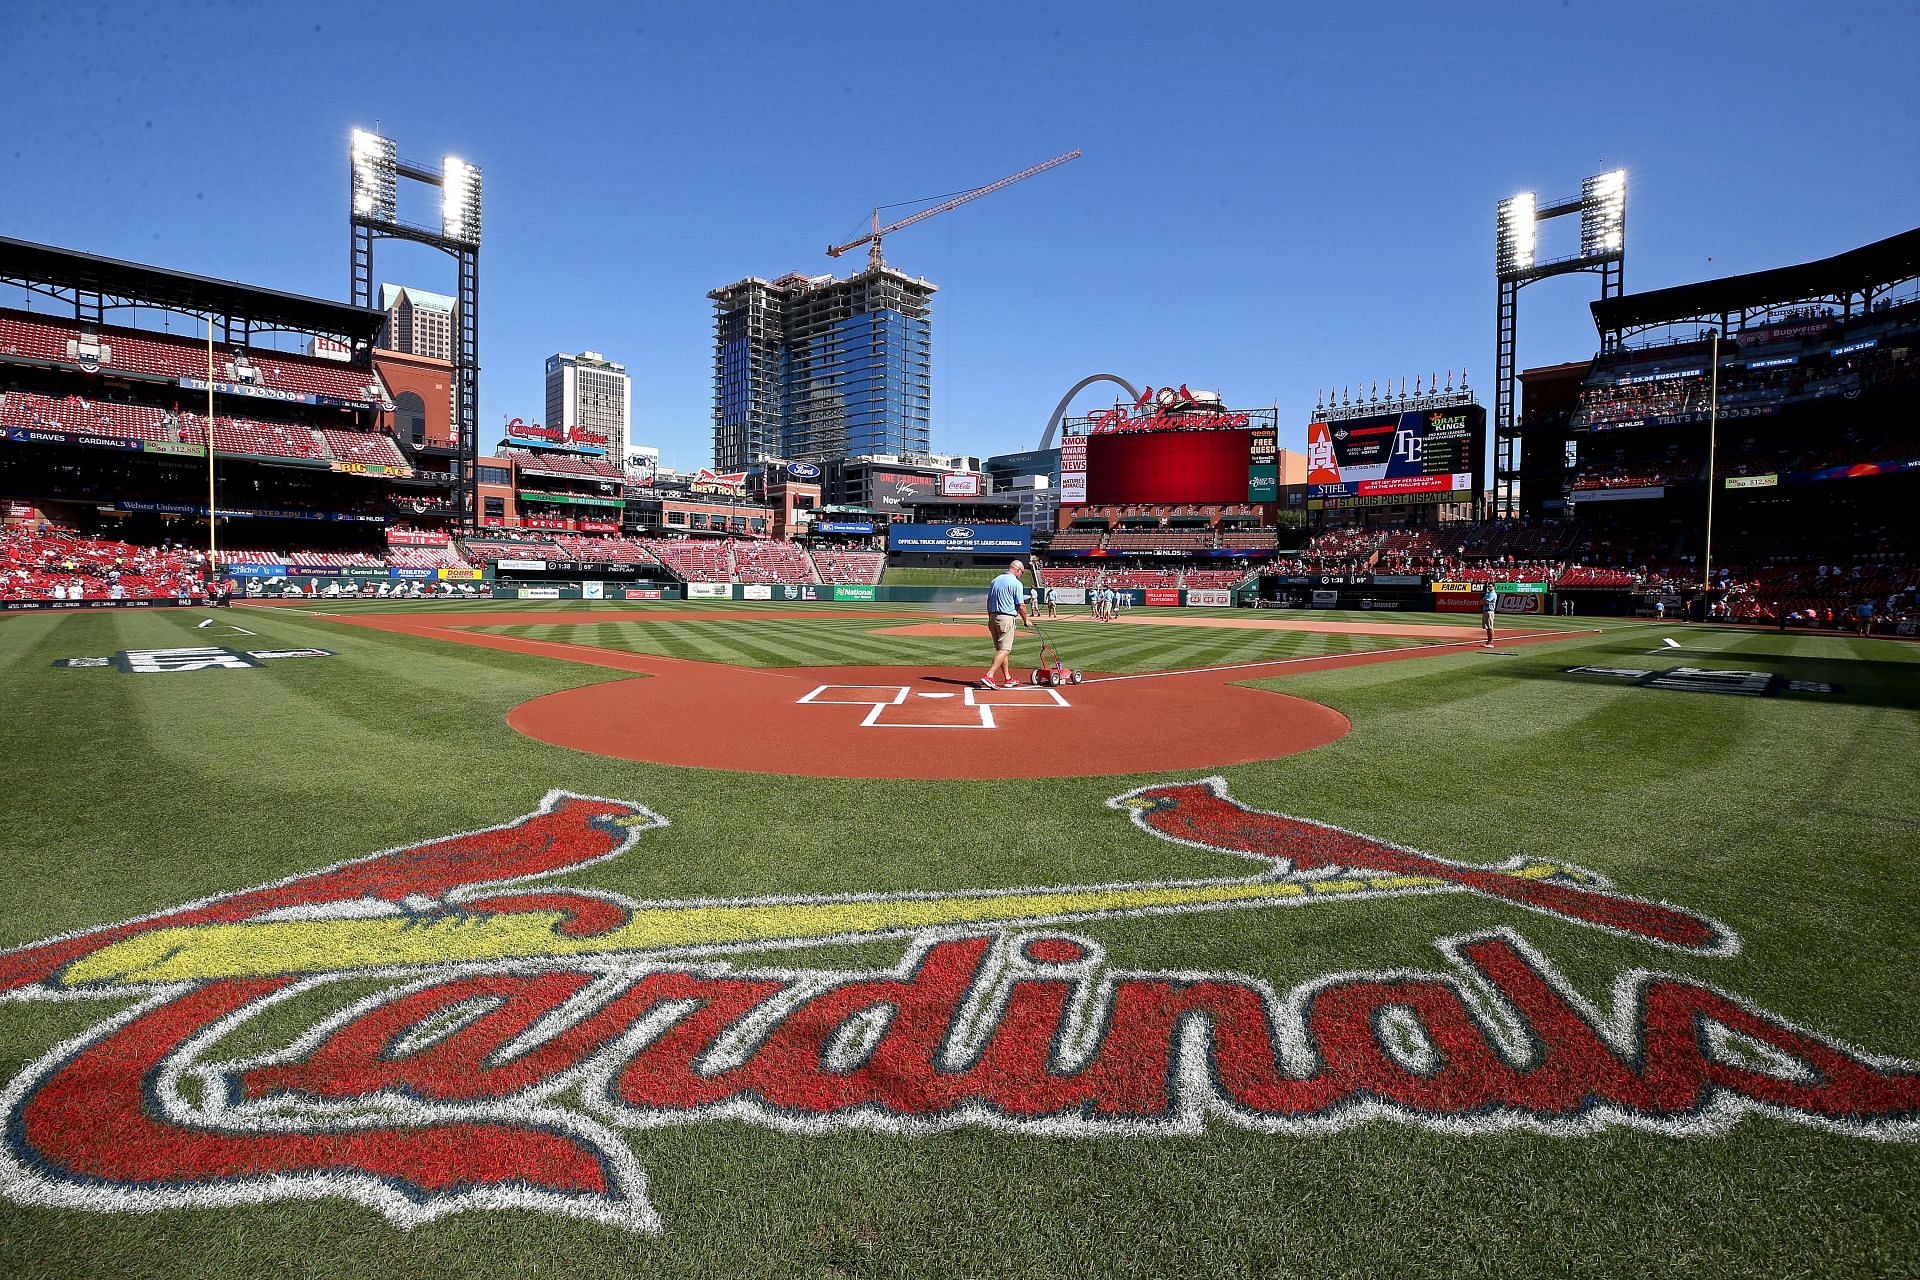 Divisional Series - Atlanta Braves v St Louis Cardinals - Game Four: ST LOUIS, MISSOURI - OCTOBER 07: A general view as a groundskeeper readies the field prior to game four of the National League Division Series between the Atlanta Braves and the St. Louis Cardinals at Busch Stadium on October 07, 2019 in St Louis, Missouri. (Photo by Jamie Squire/Getty Images)